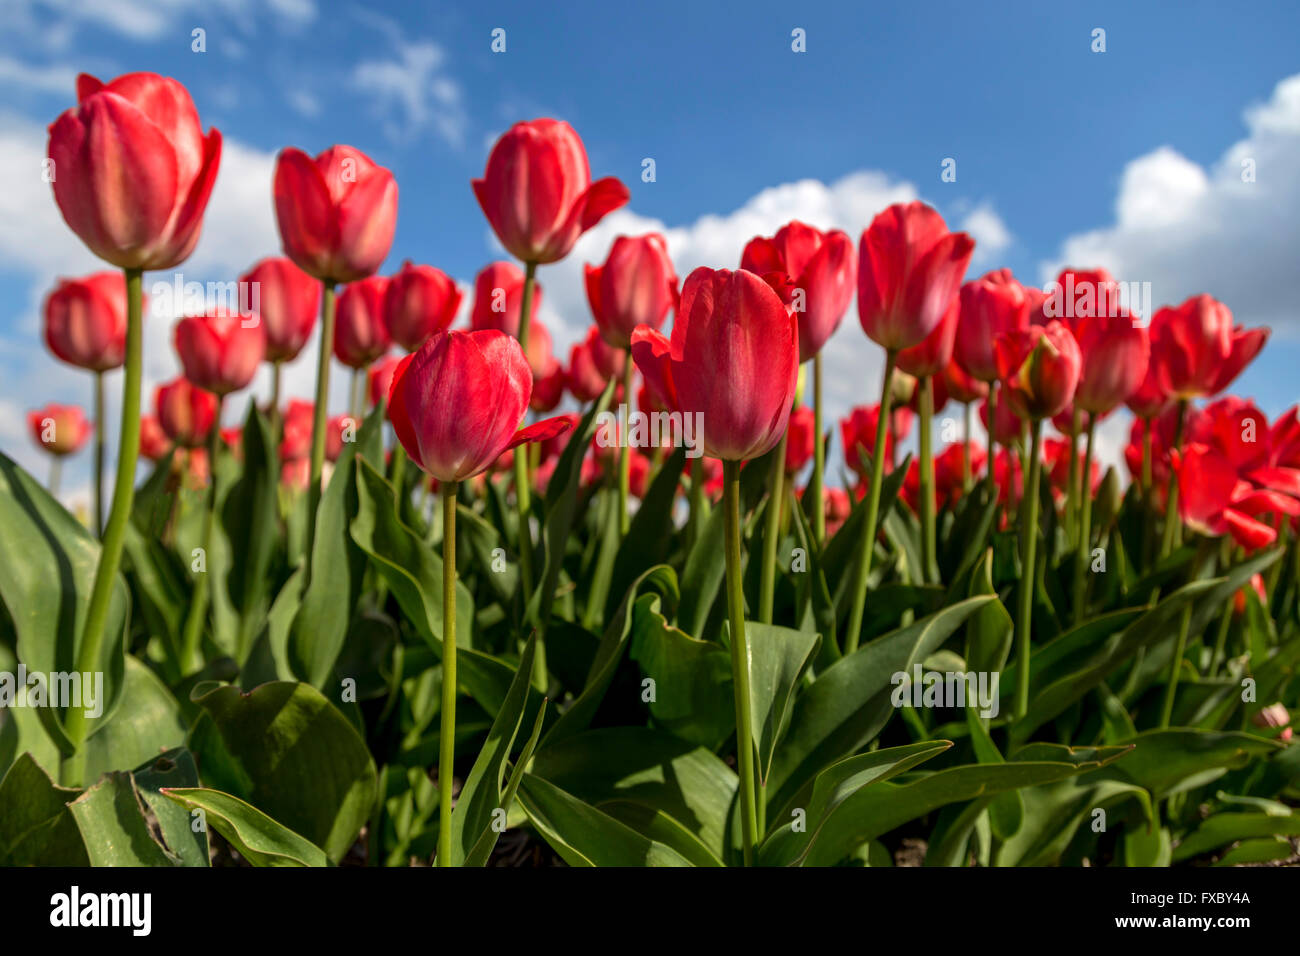 Spring time in The Netherlands: Typically flat countryside with flowering red tulips, Noordwijkerhout, South Holland. Stock Photo